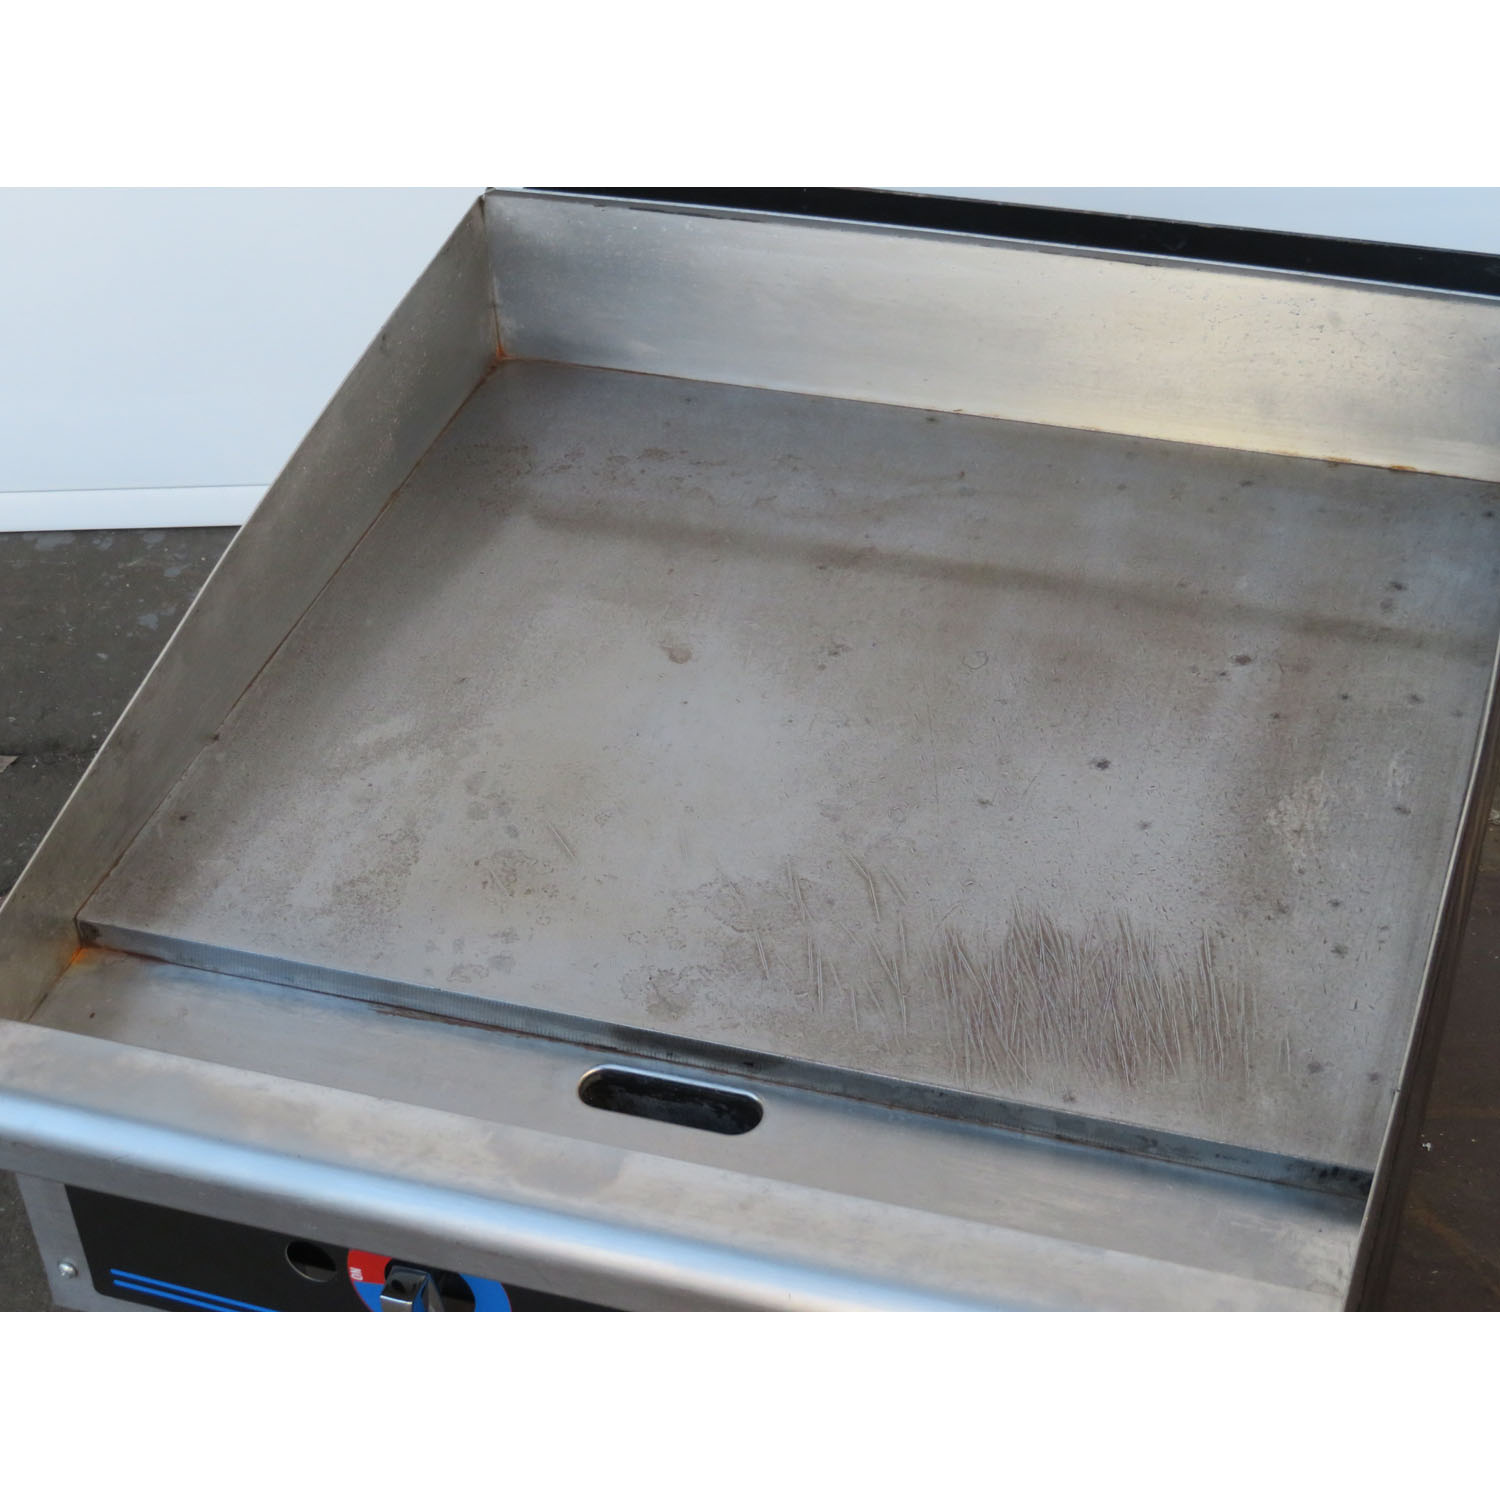 Star Max 624MD, 24 Inch Gas Griddle, Used Very Good Condition image 1